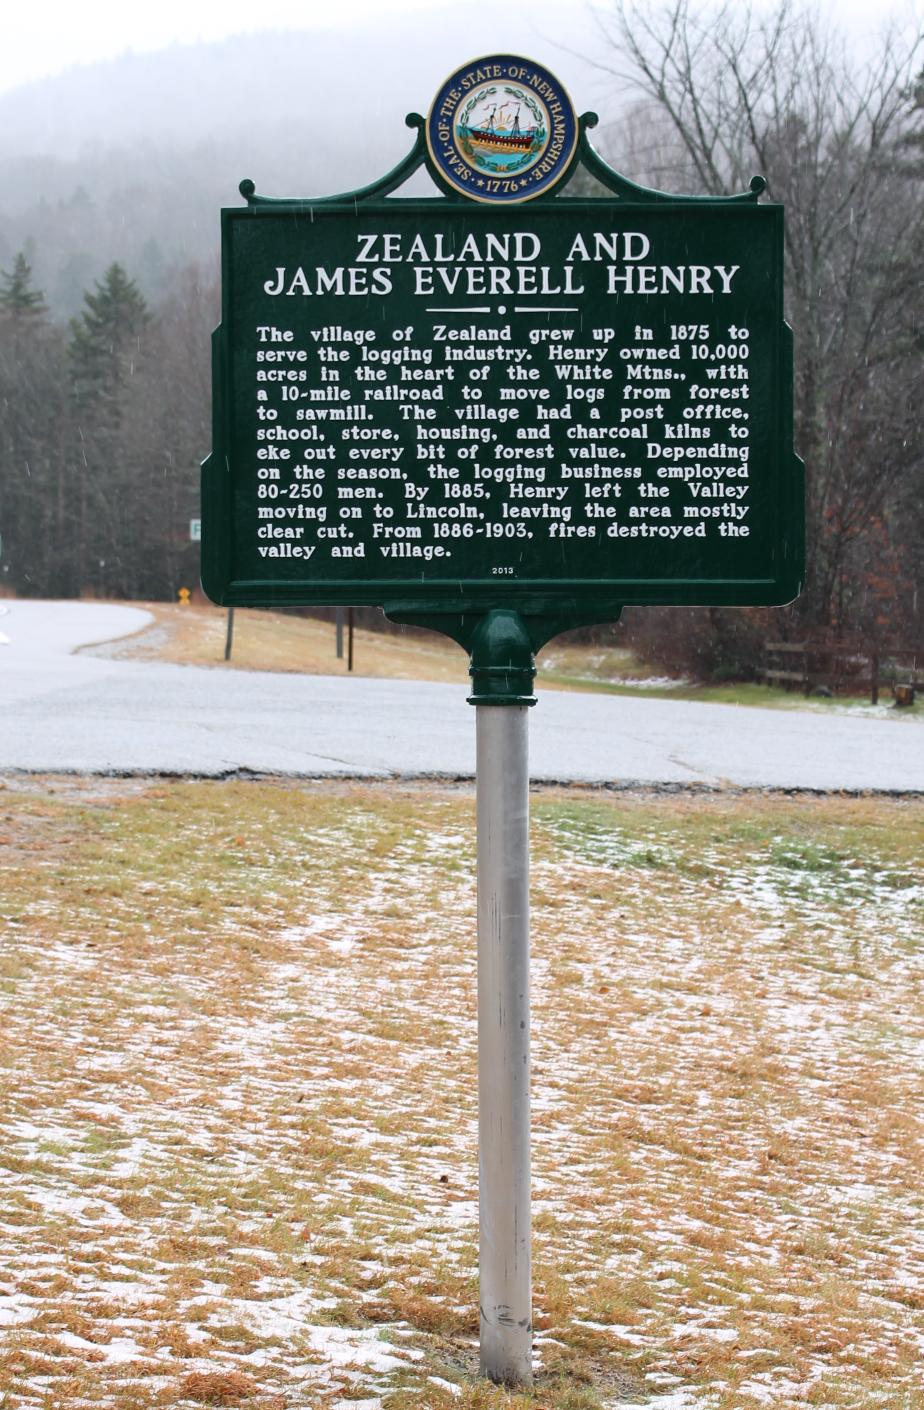 Zealand and James Everell Henry Historicasl Marker - Carroll New Hampshire